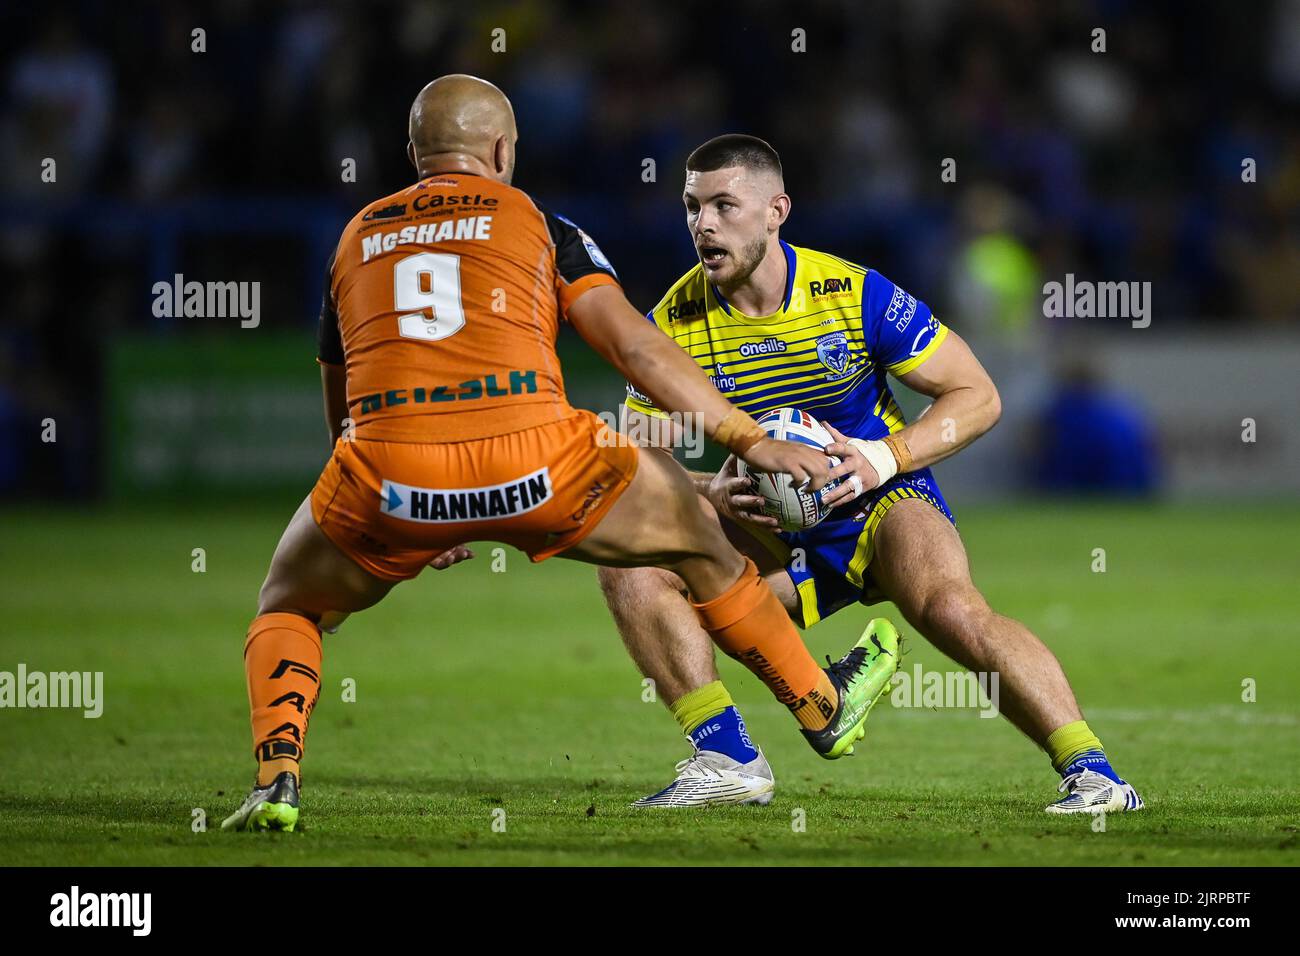 Danny Walker #16 of Warrington Wolves in action in, on 8/25/2022. (Photo by Craig Thomas/News Images/Sipa USA) Credit: Sipa USA/Alamy Live News Stock Photo